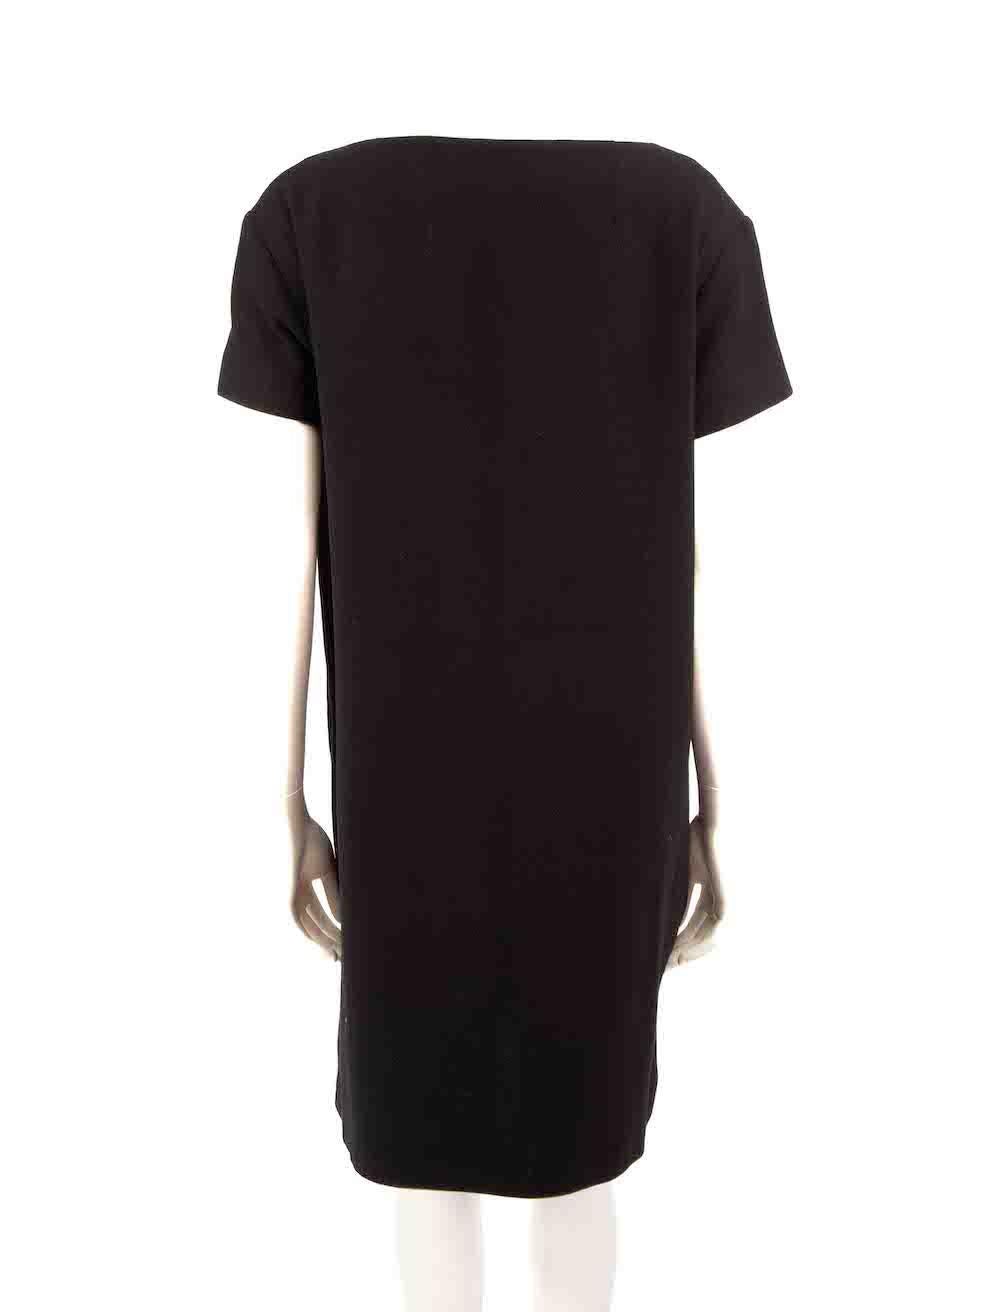 Sofie D'Hoore Black Round Neck Shift Dress Size XL In Good Condition For Sale In London, GB